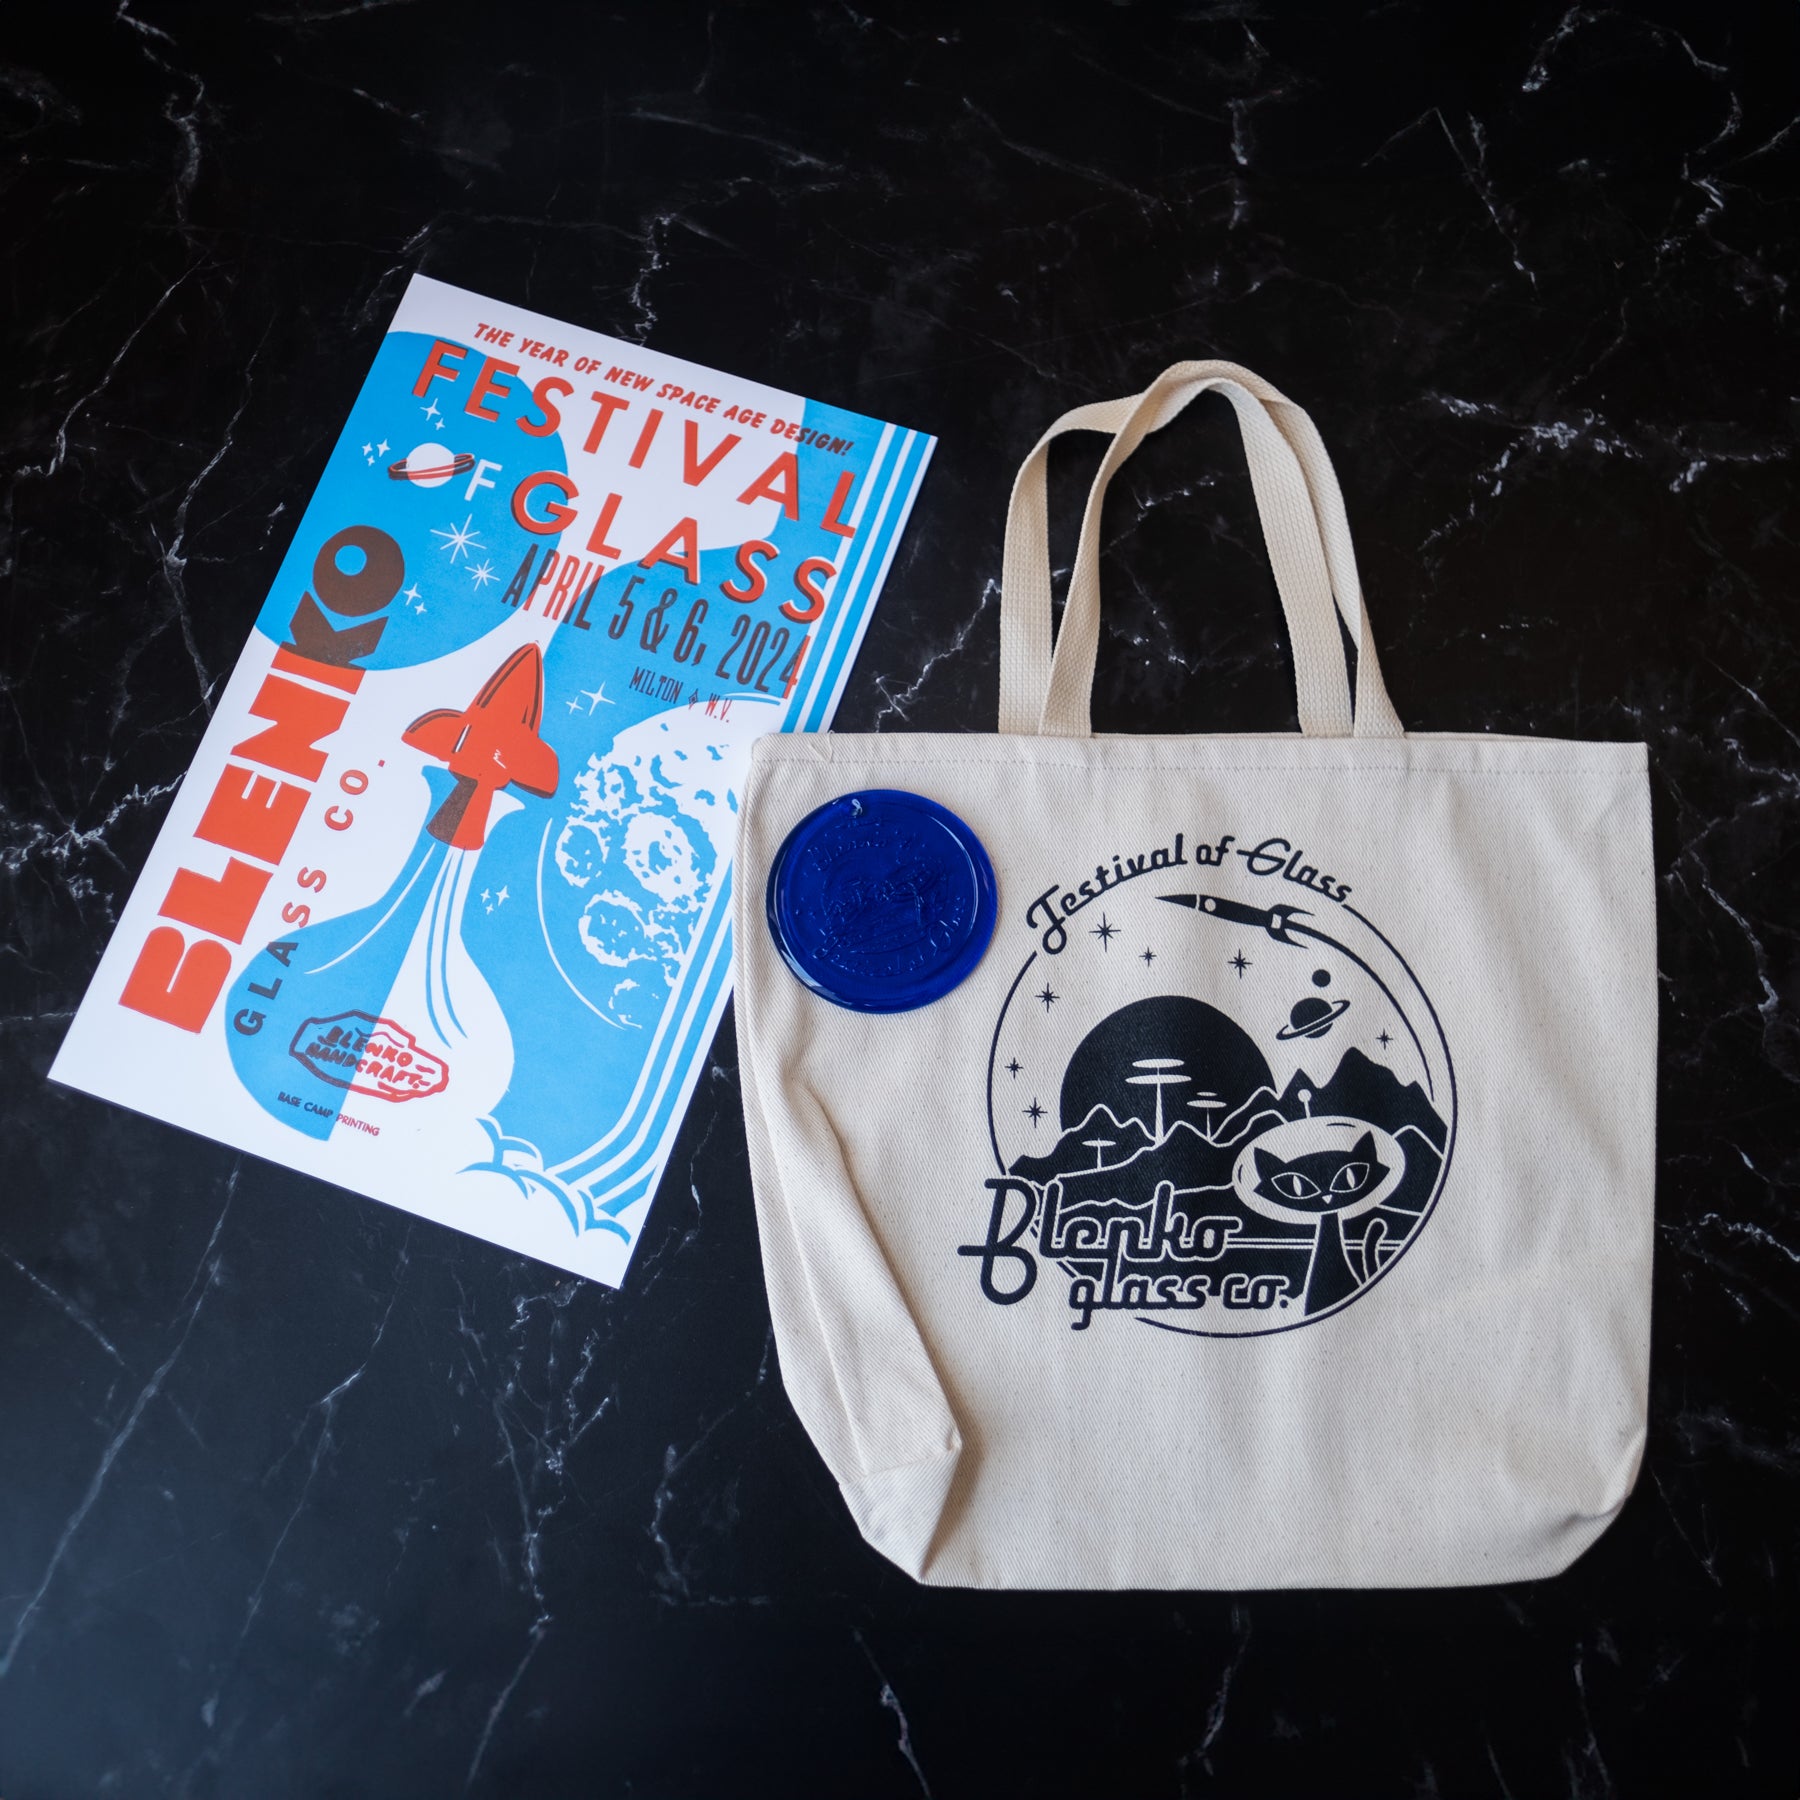 Festival of Glass 'Space Kitty' Tote Bag